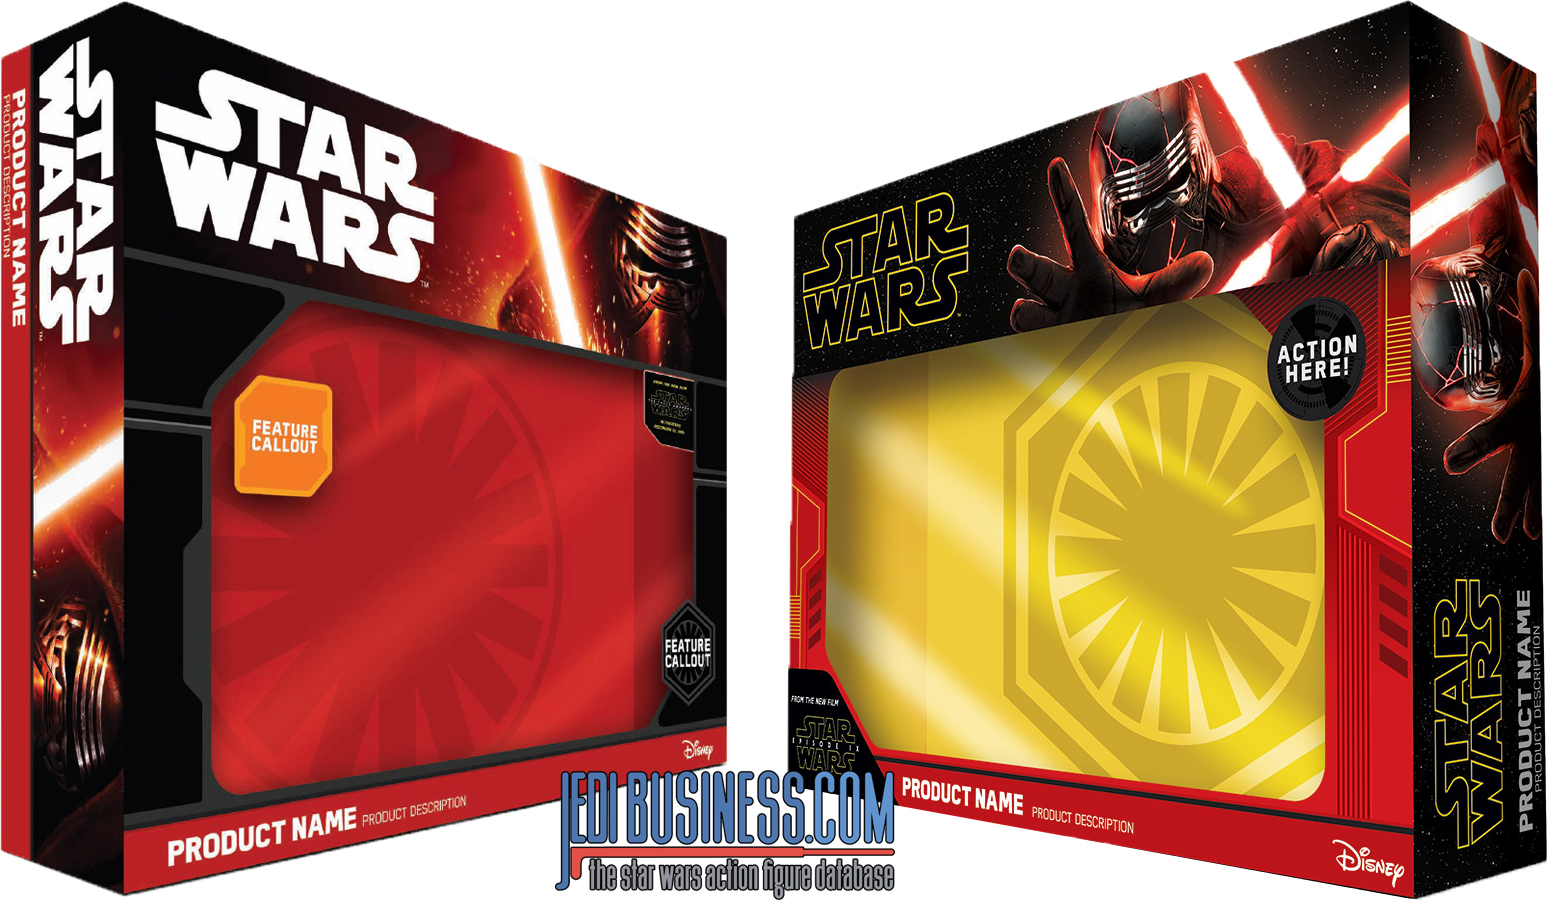 The Force Awakens and Rise Of Skywalker packaging